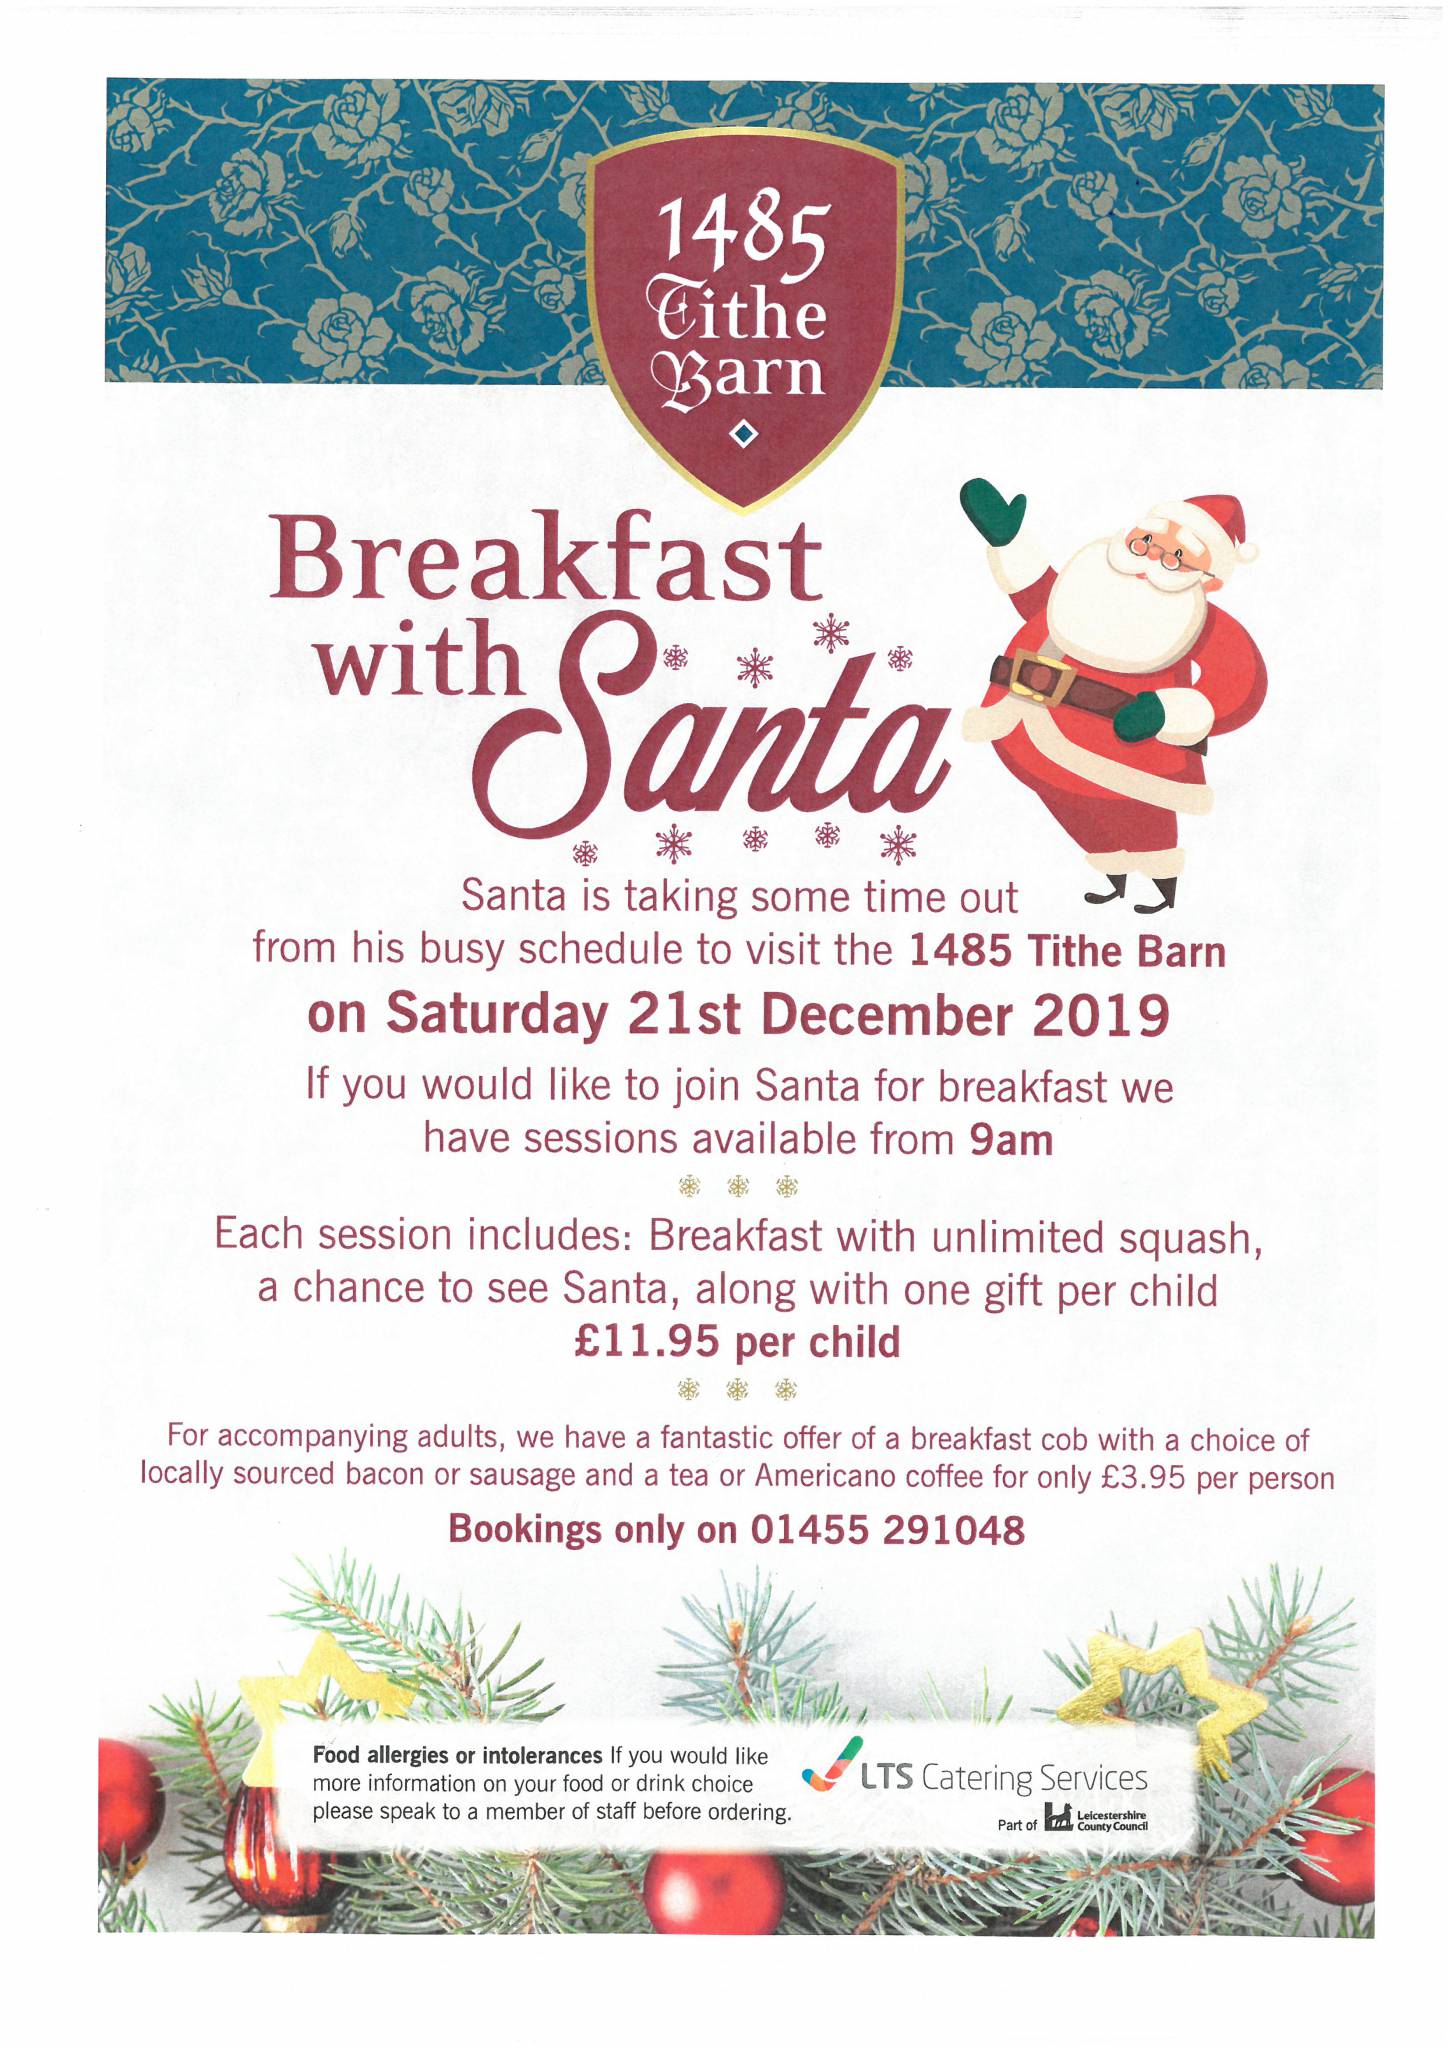 Breakfast with Santa - SOLD OUT